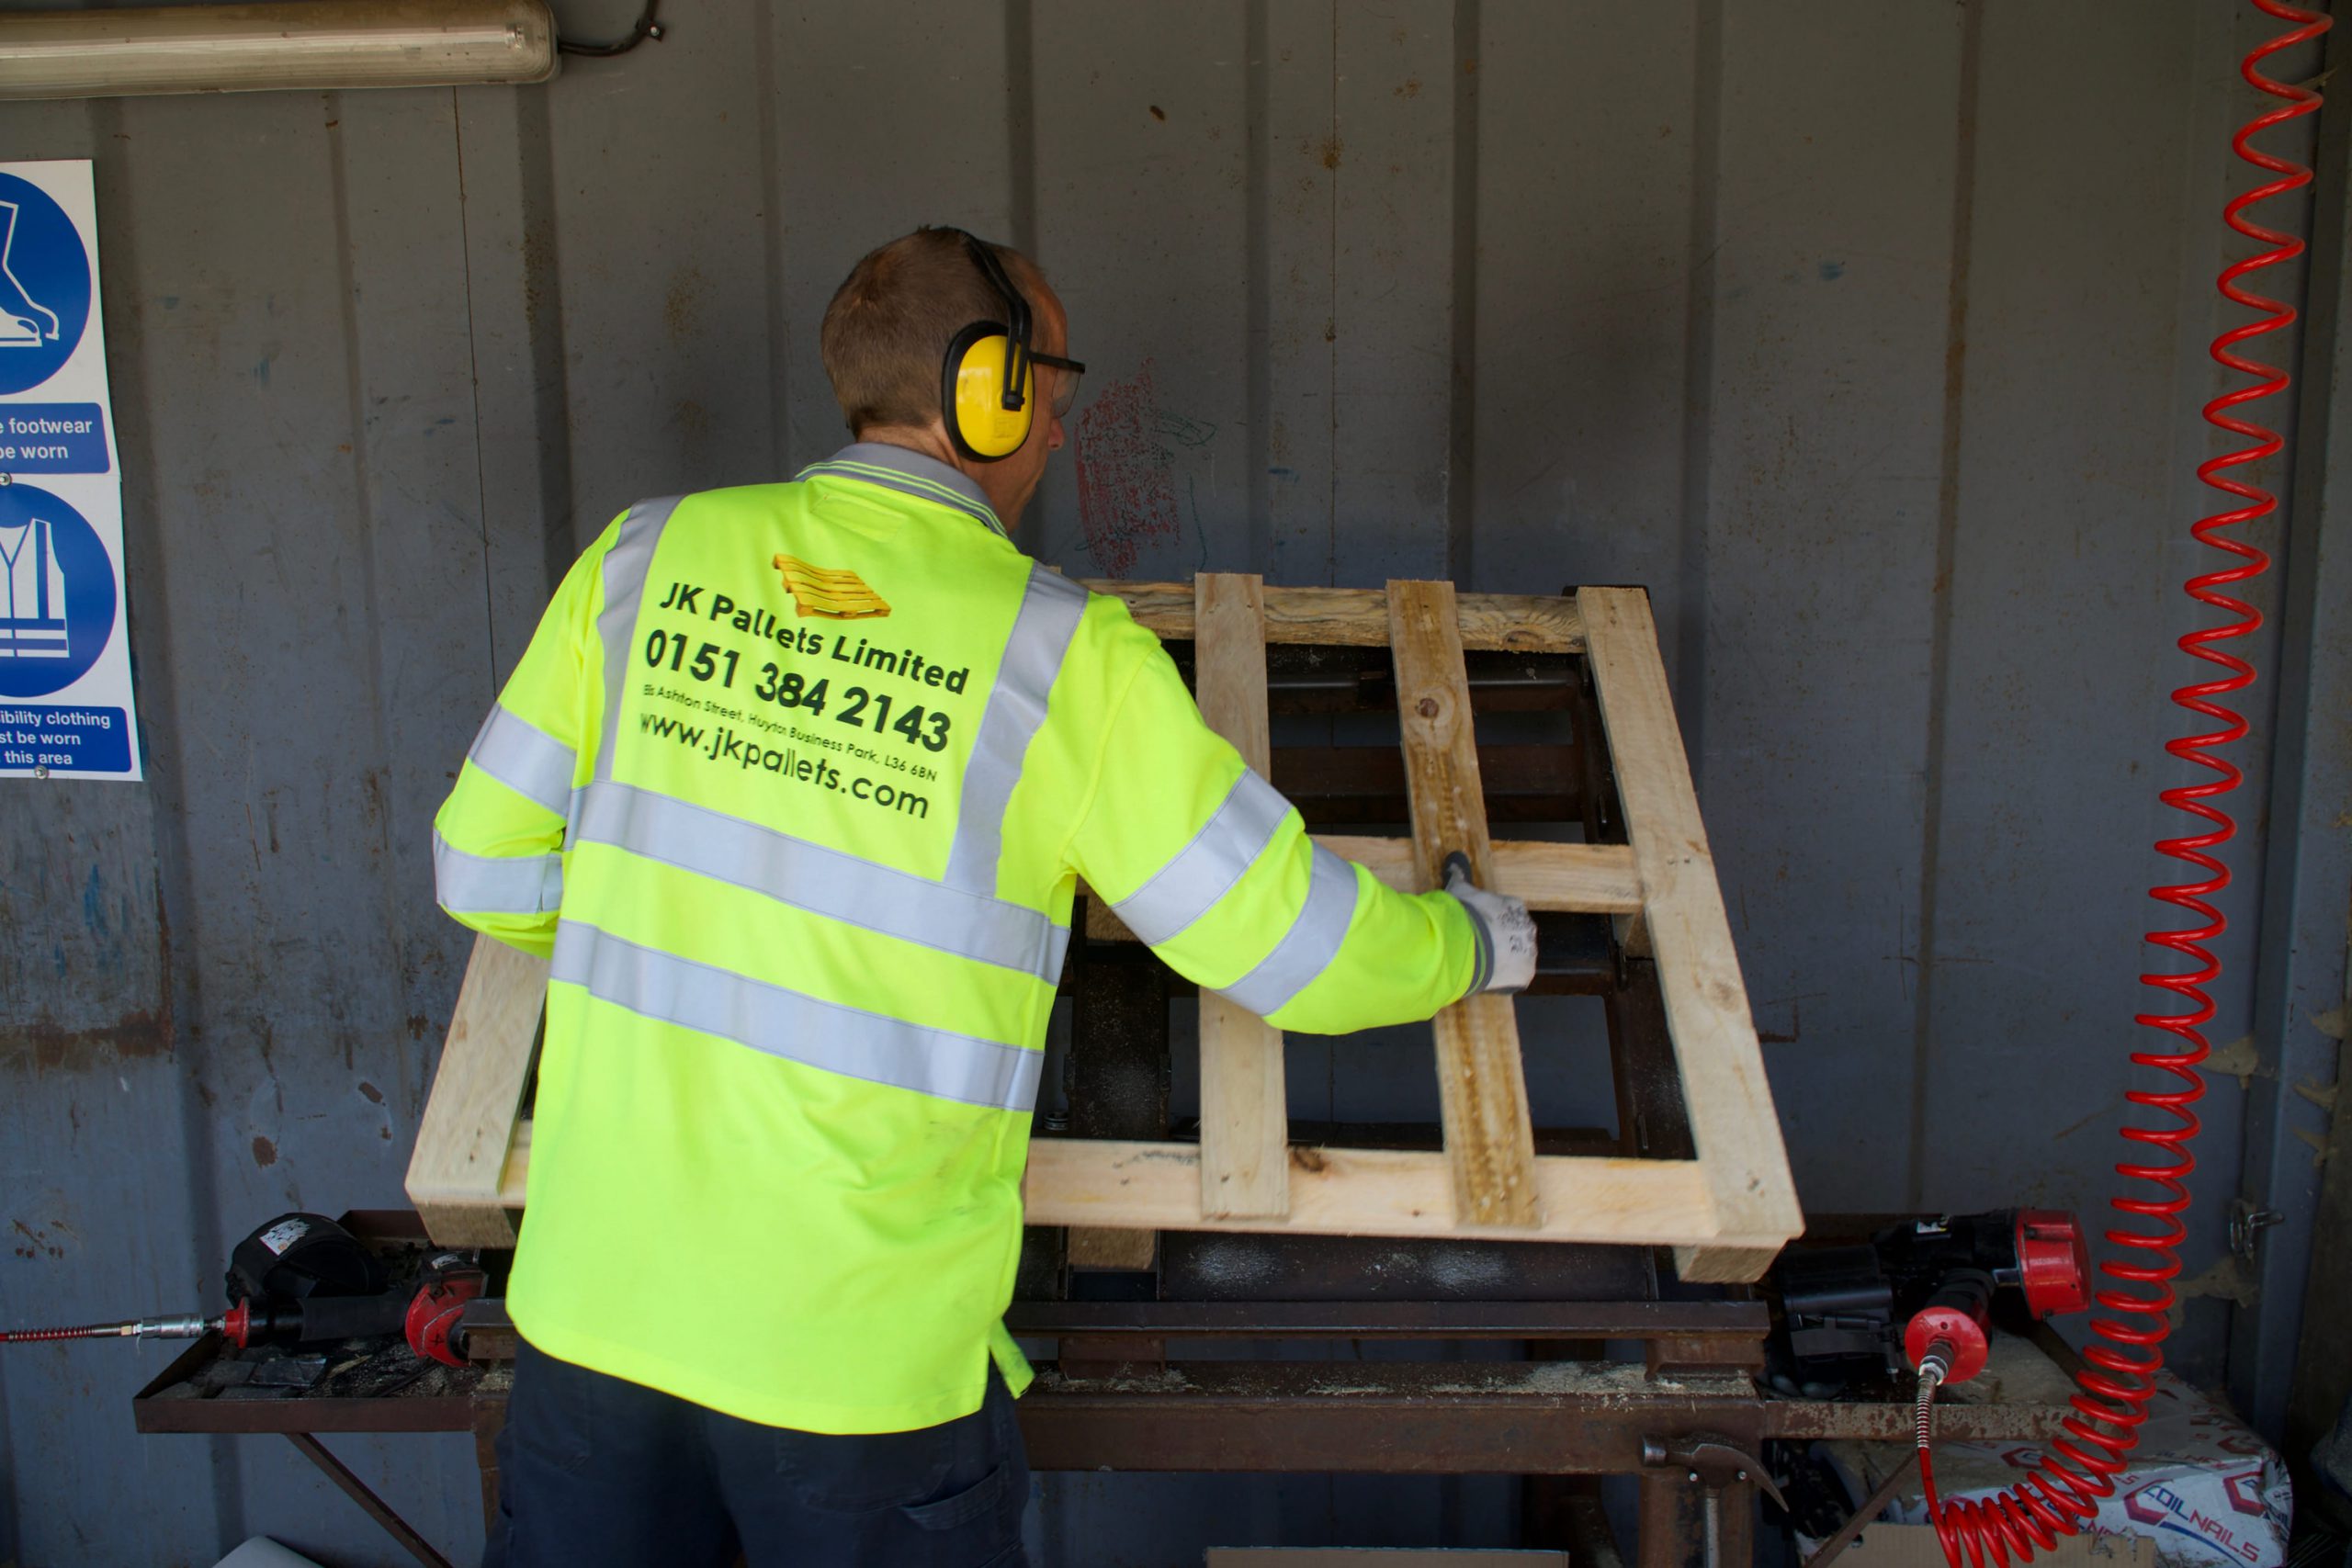 Buy quality new and used pallets